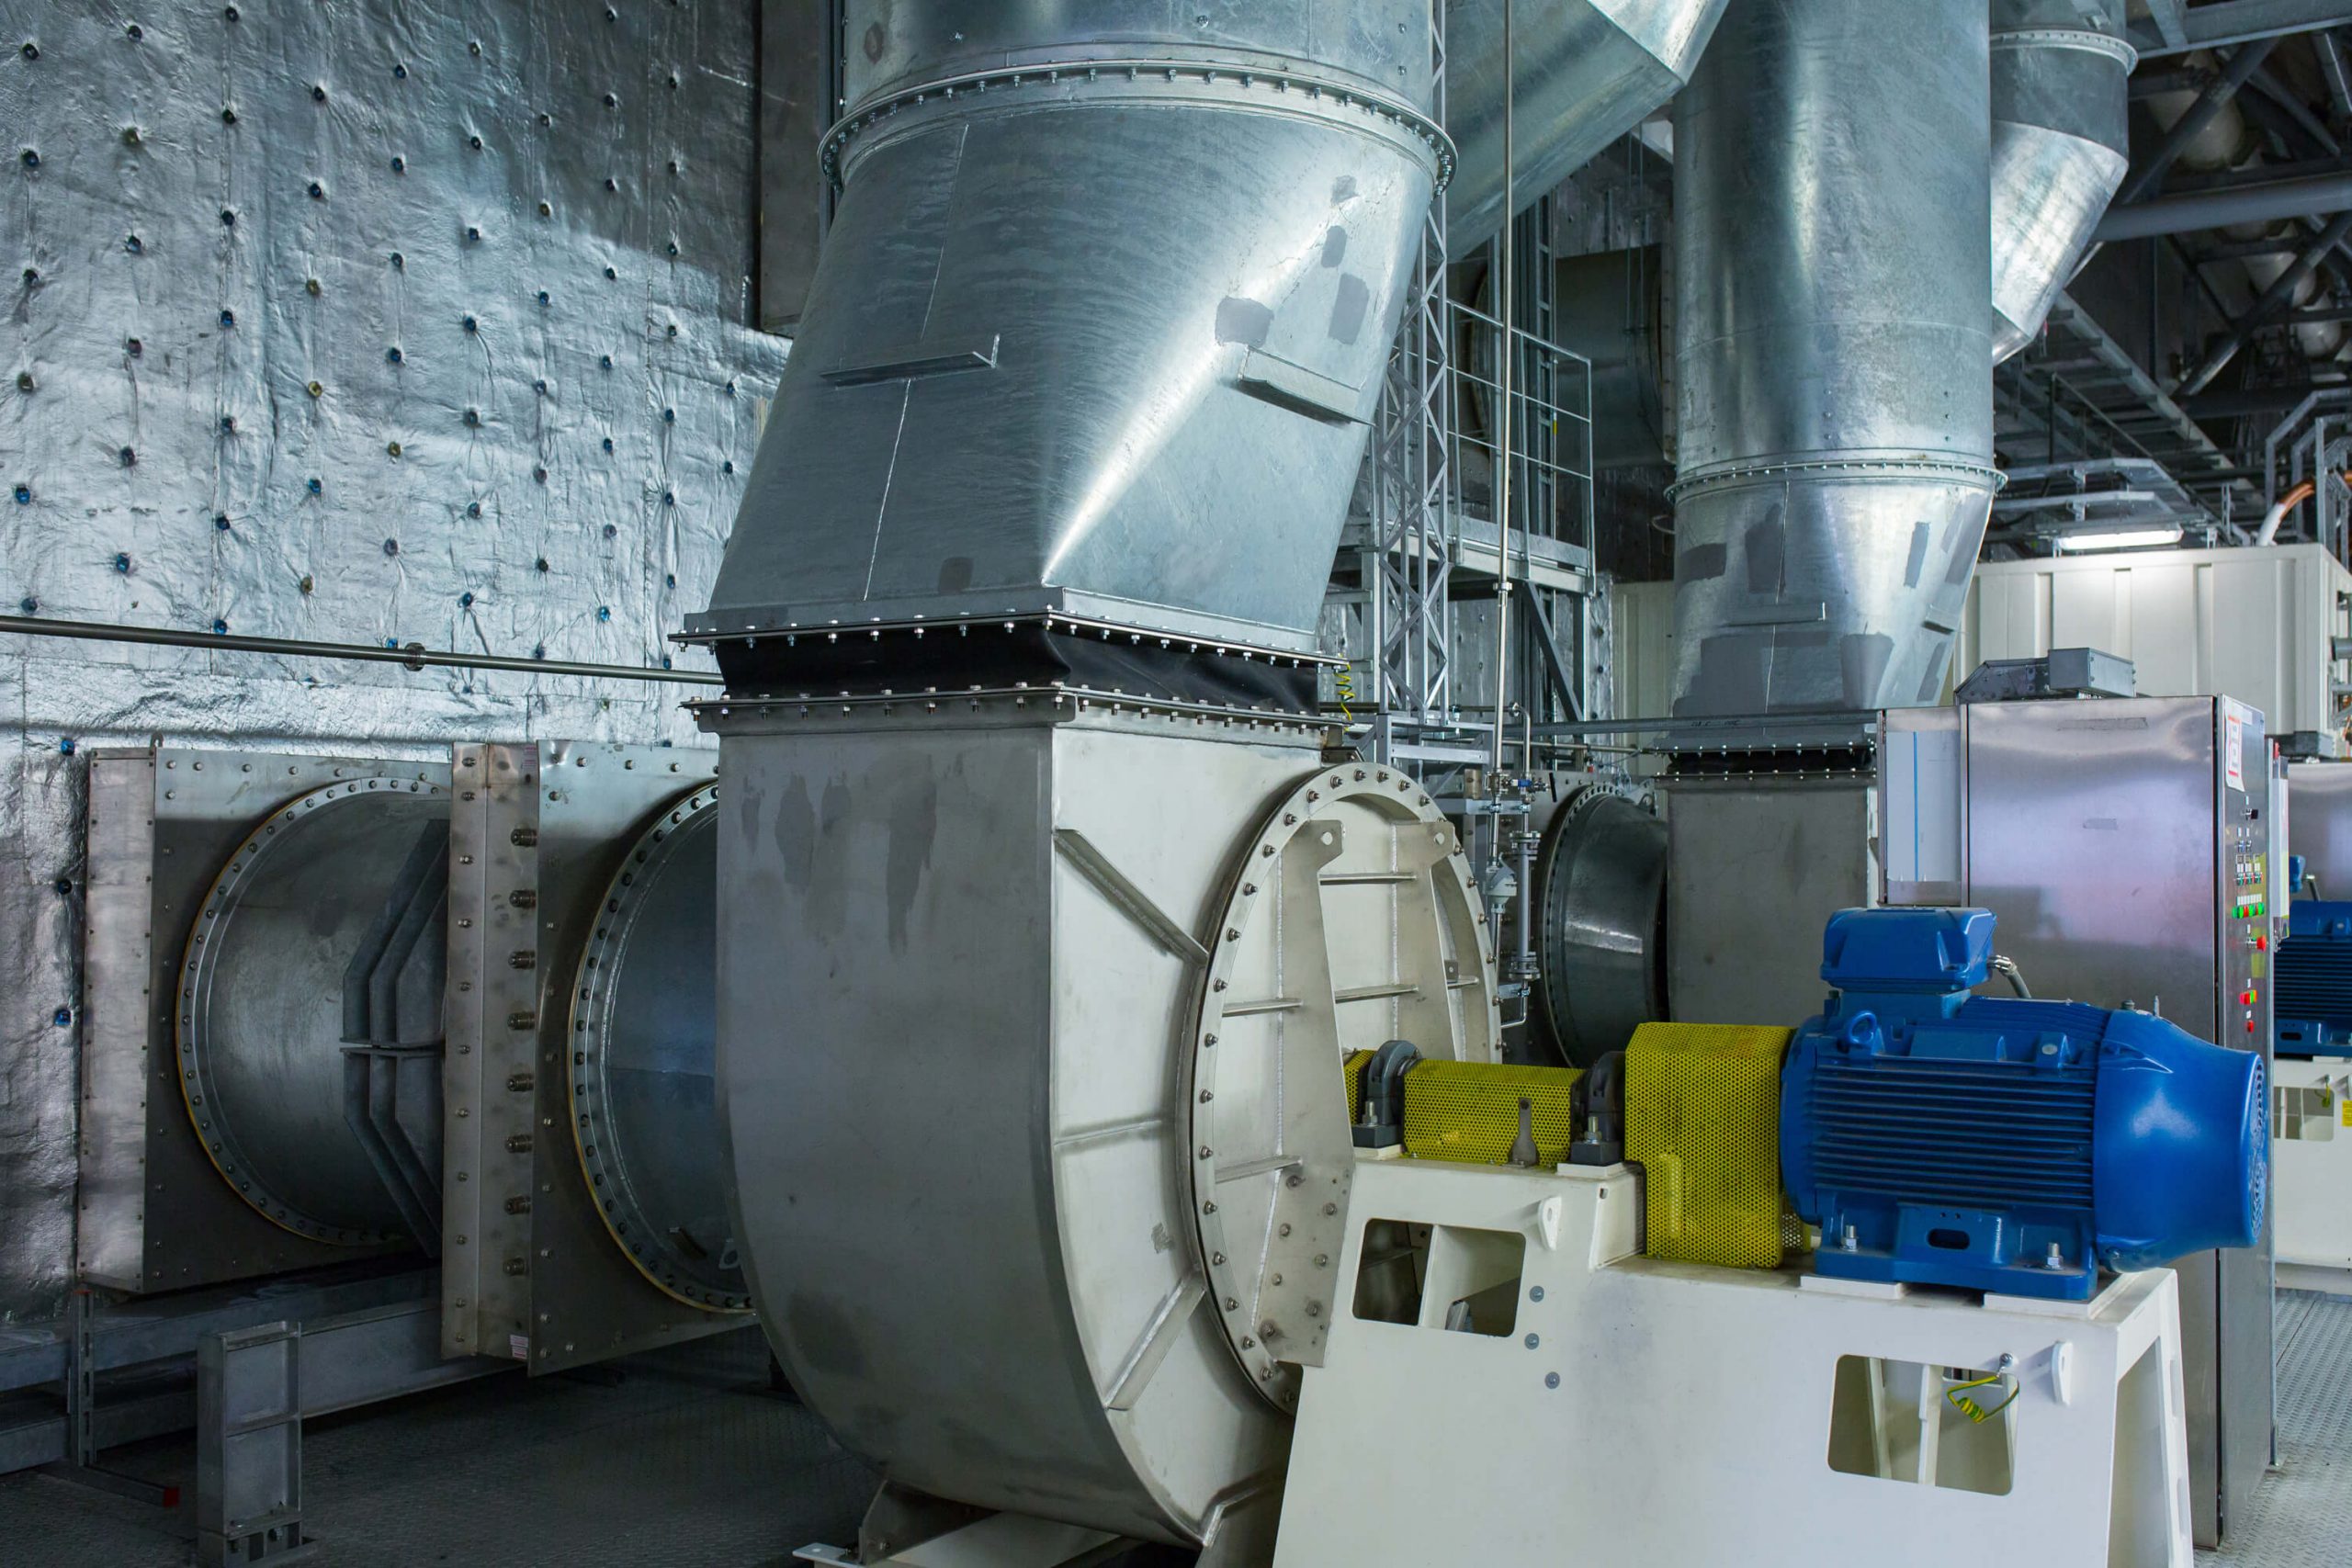 Turbine Inlet Air Cooling Systems provide microclimate support at a large industrial site.